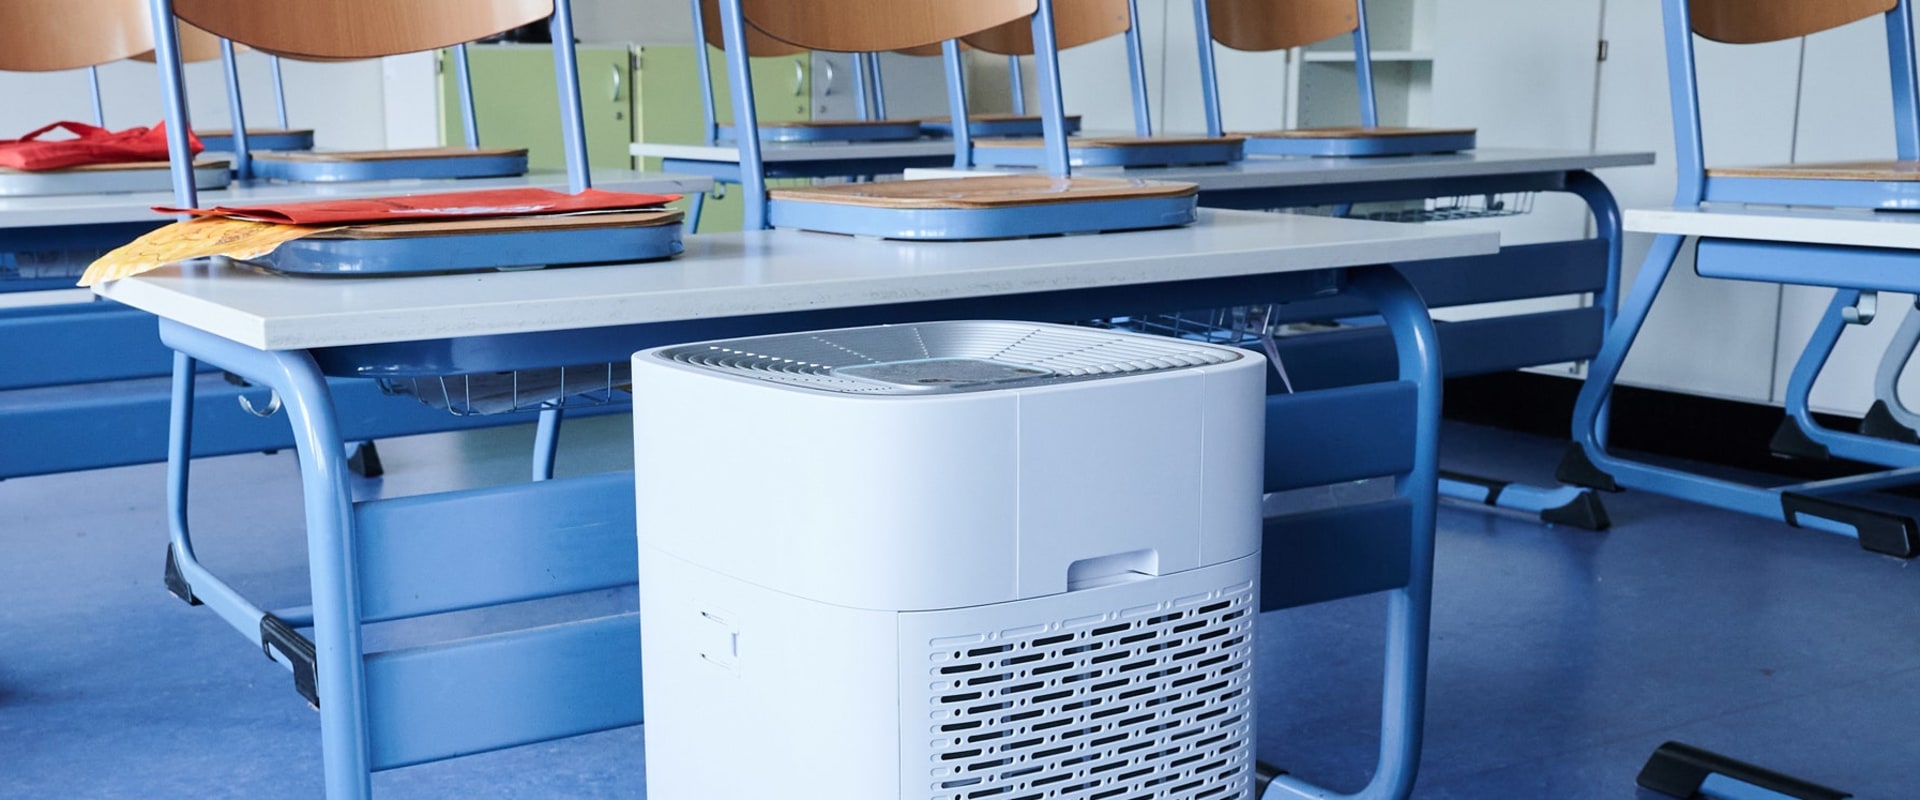 Do Air Purifiers Really Make a Difference?